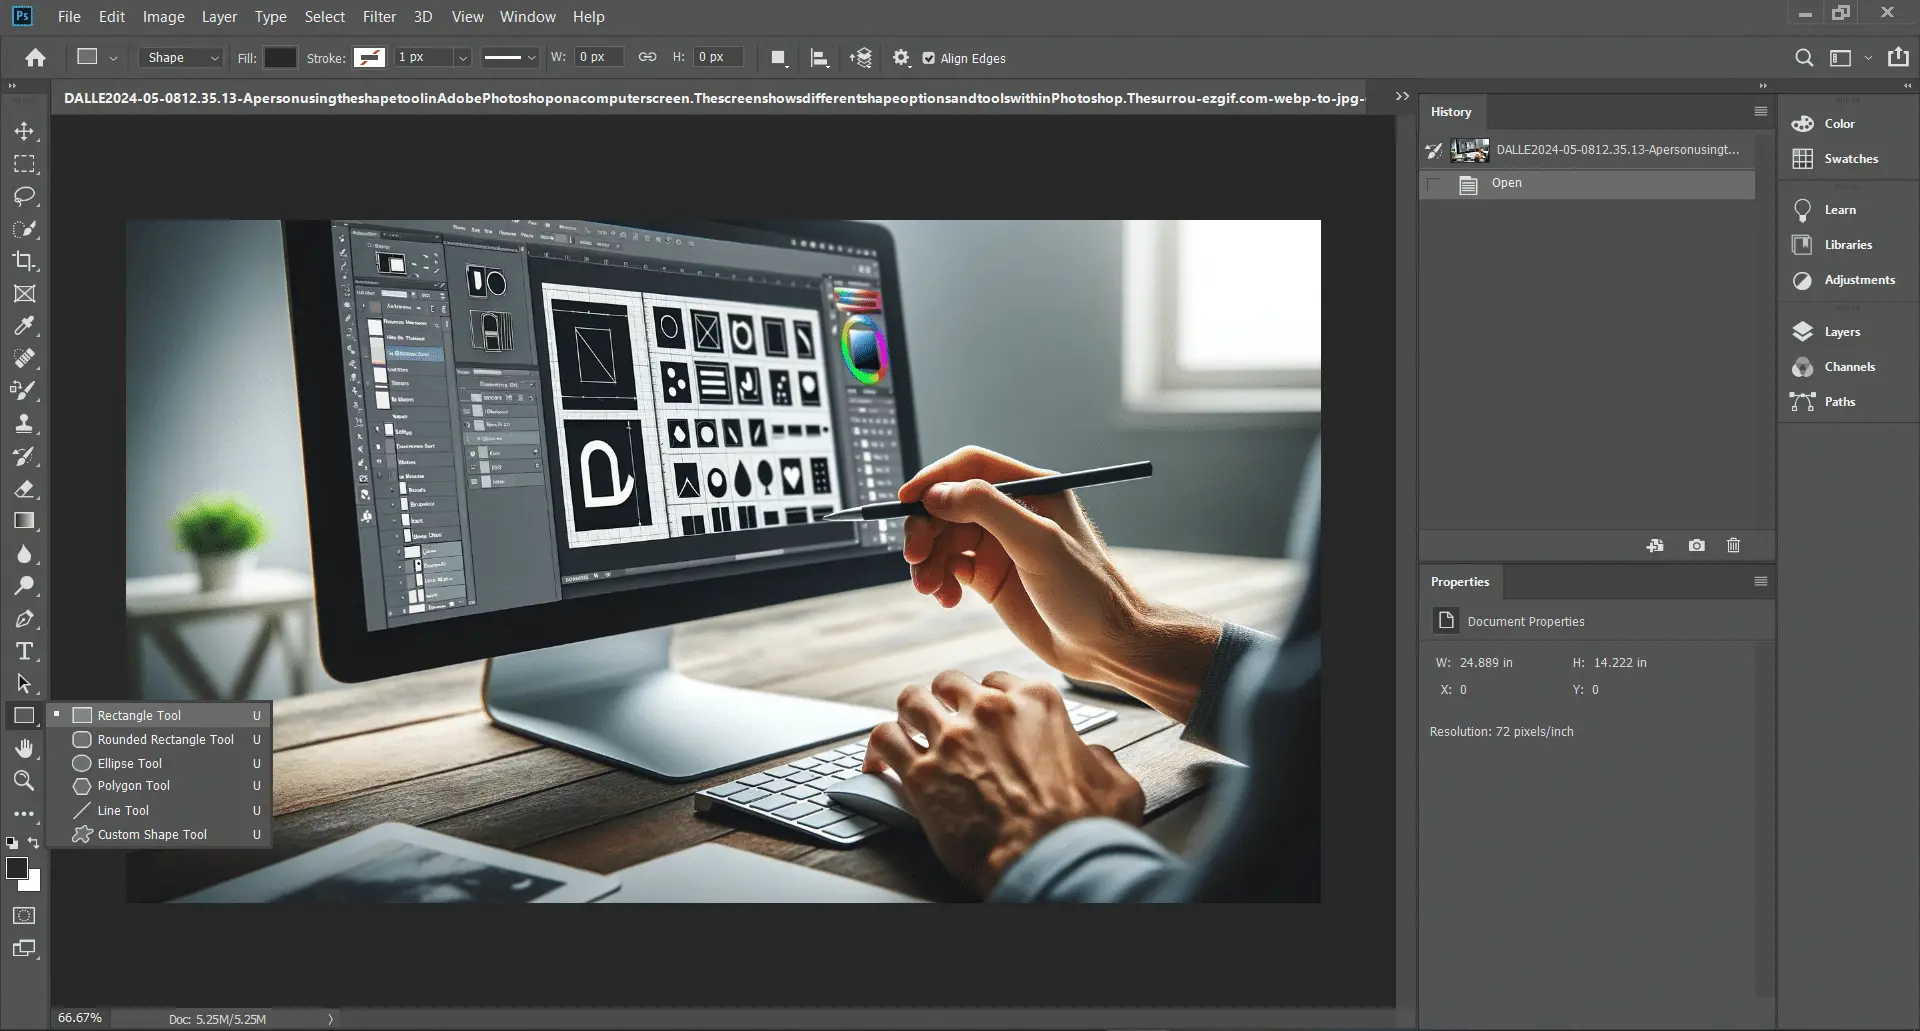 Graphic designer using the Shape Tool in Adobe Photoshop to create a custom shape on a digital canvas.